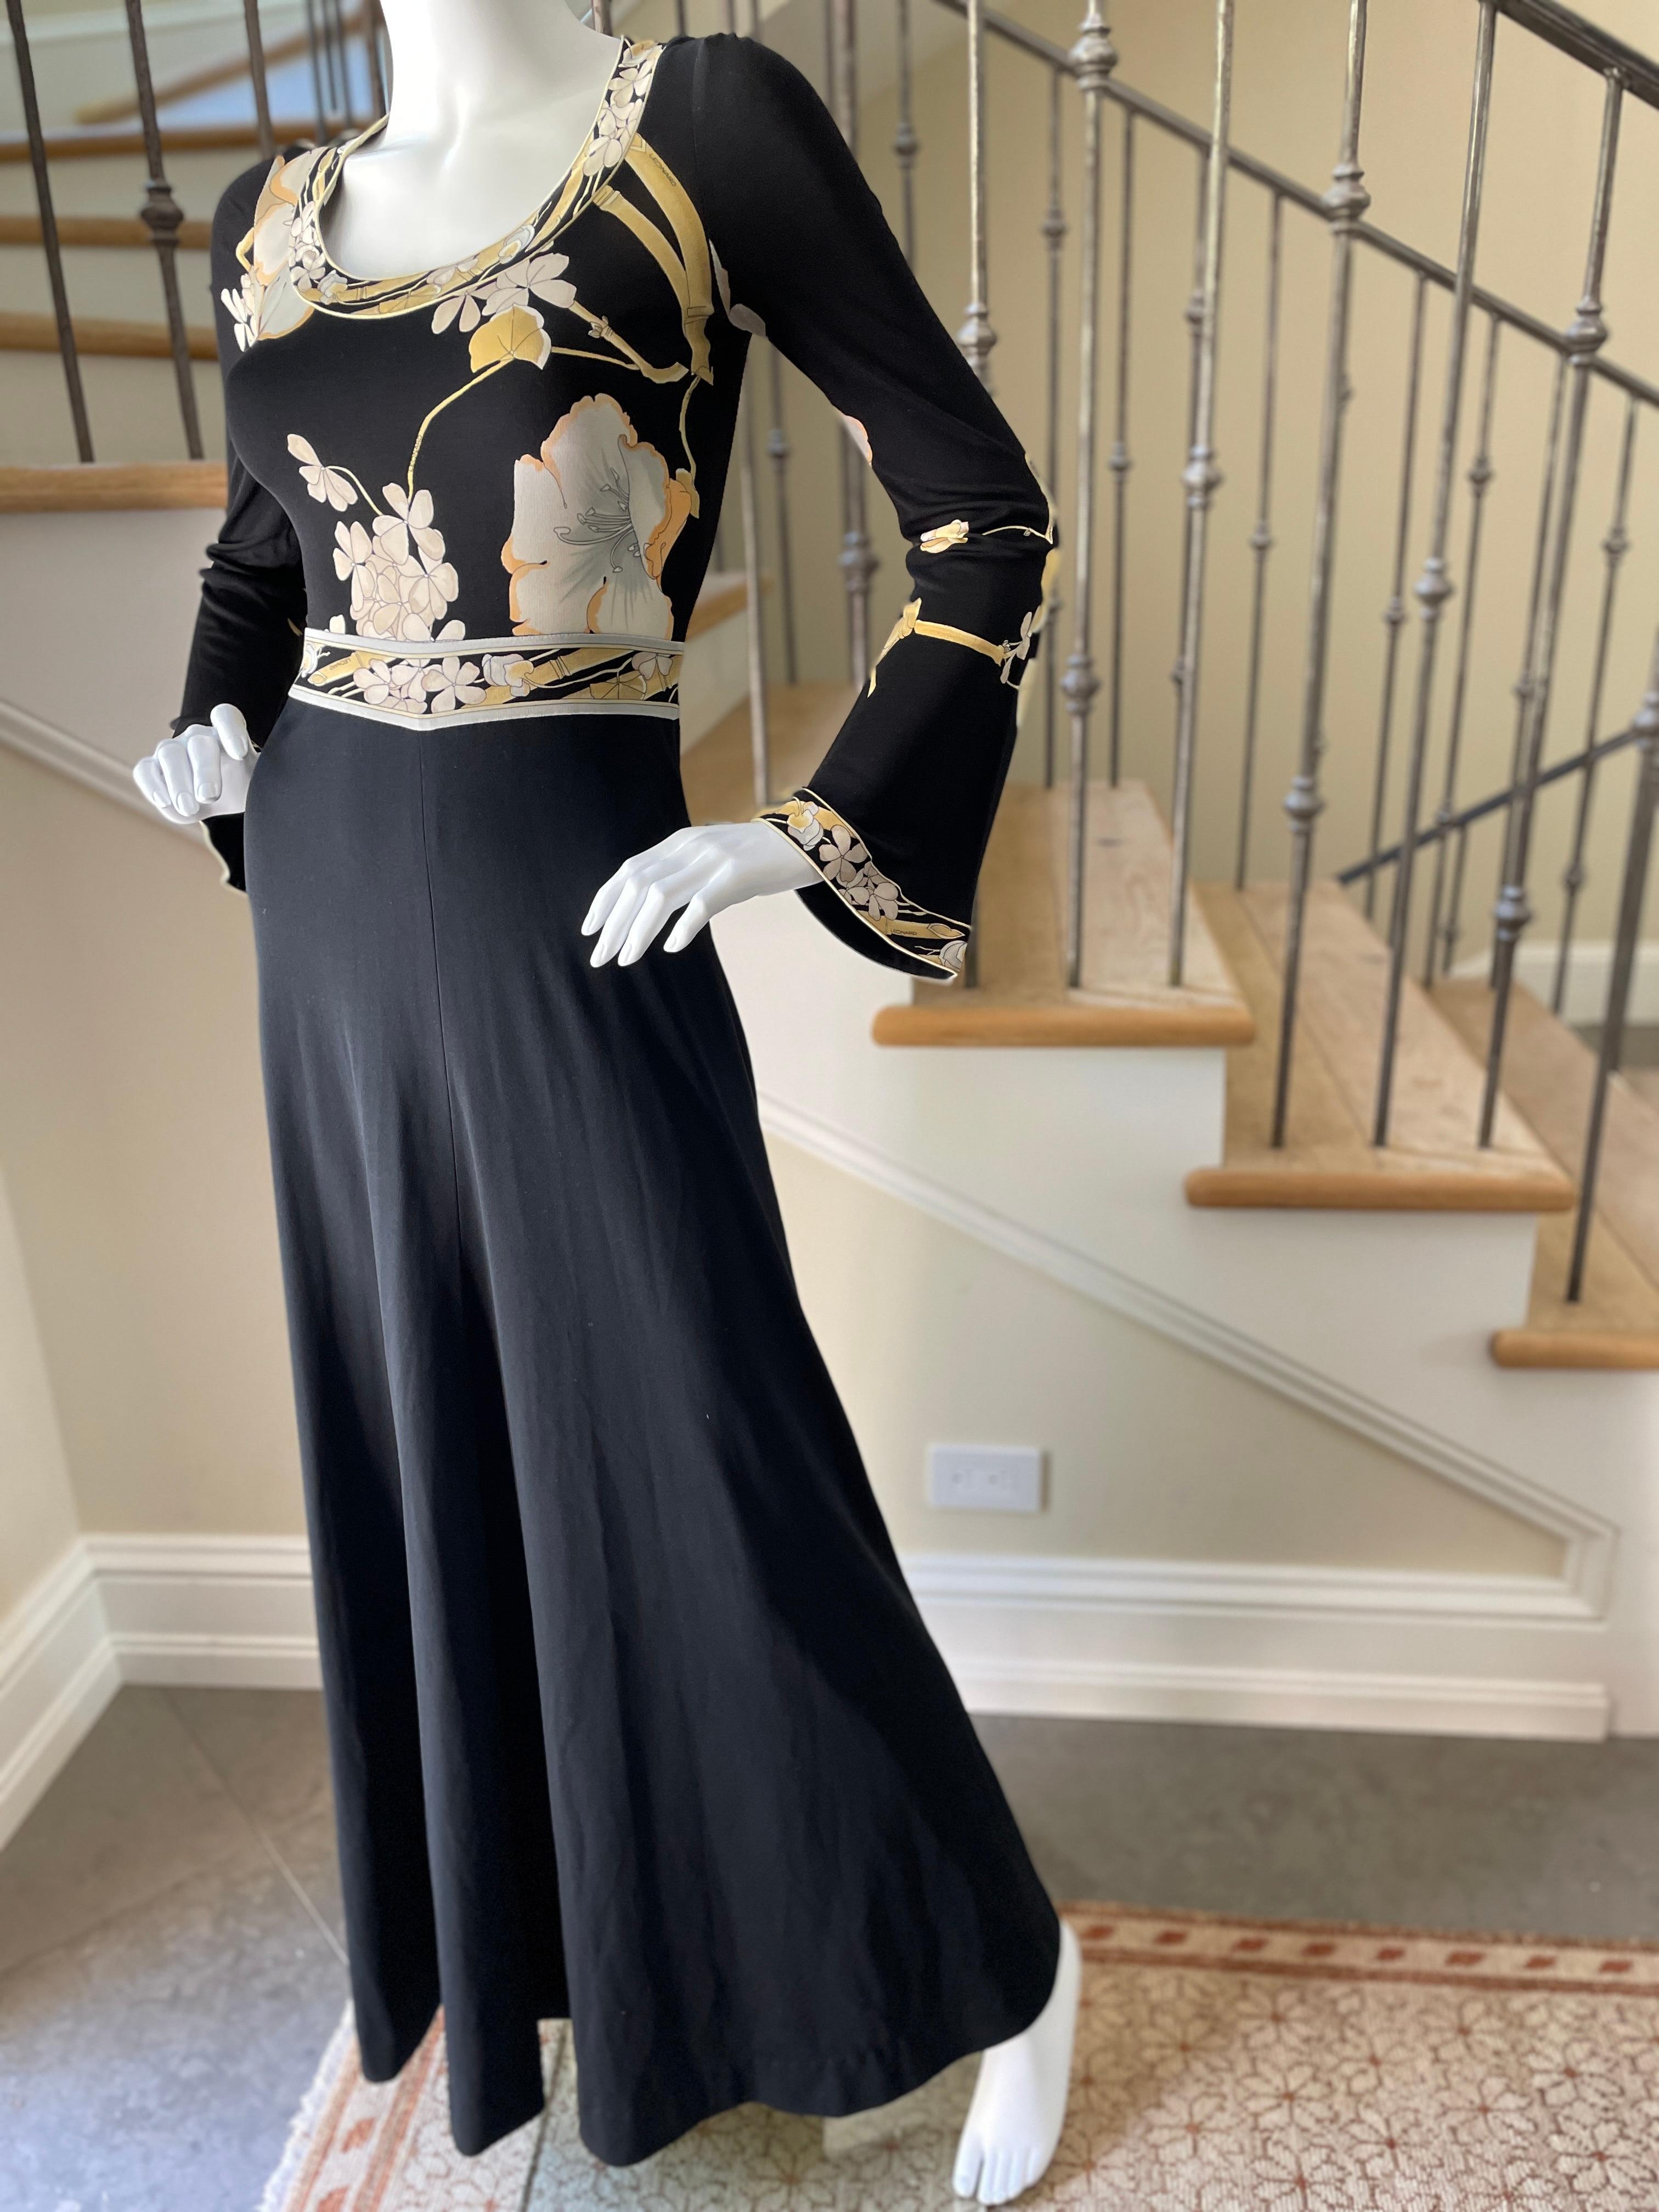 Leonard Paris Vintage 70's Long Silk Jersey Floral Dress 
So pretty, please use the zoom lens to see details.
Leonard Paris was a contemporary of Pucci, both houses creating brilliant 60's patterns on silk jersey.
Both were very expensive, and